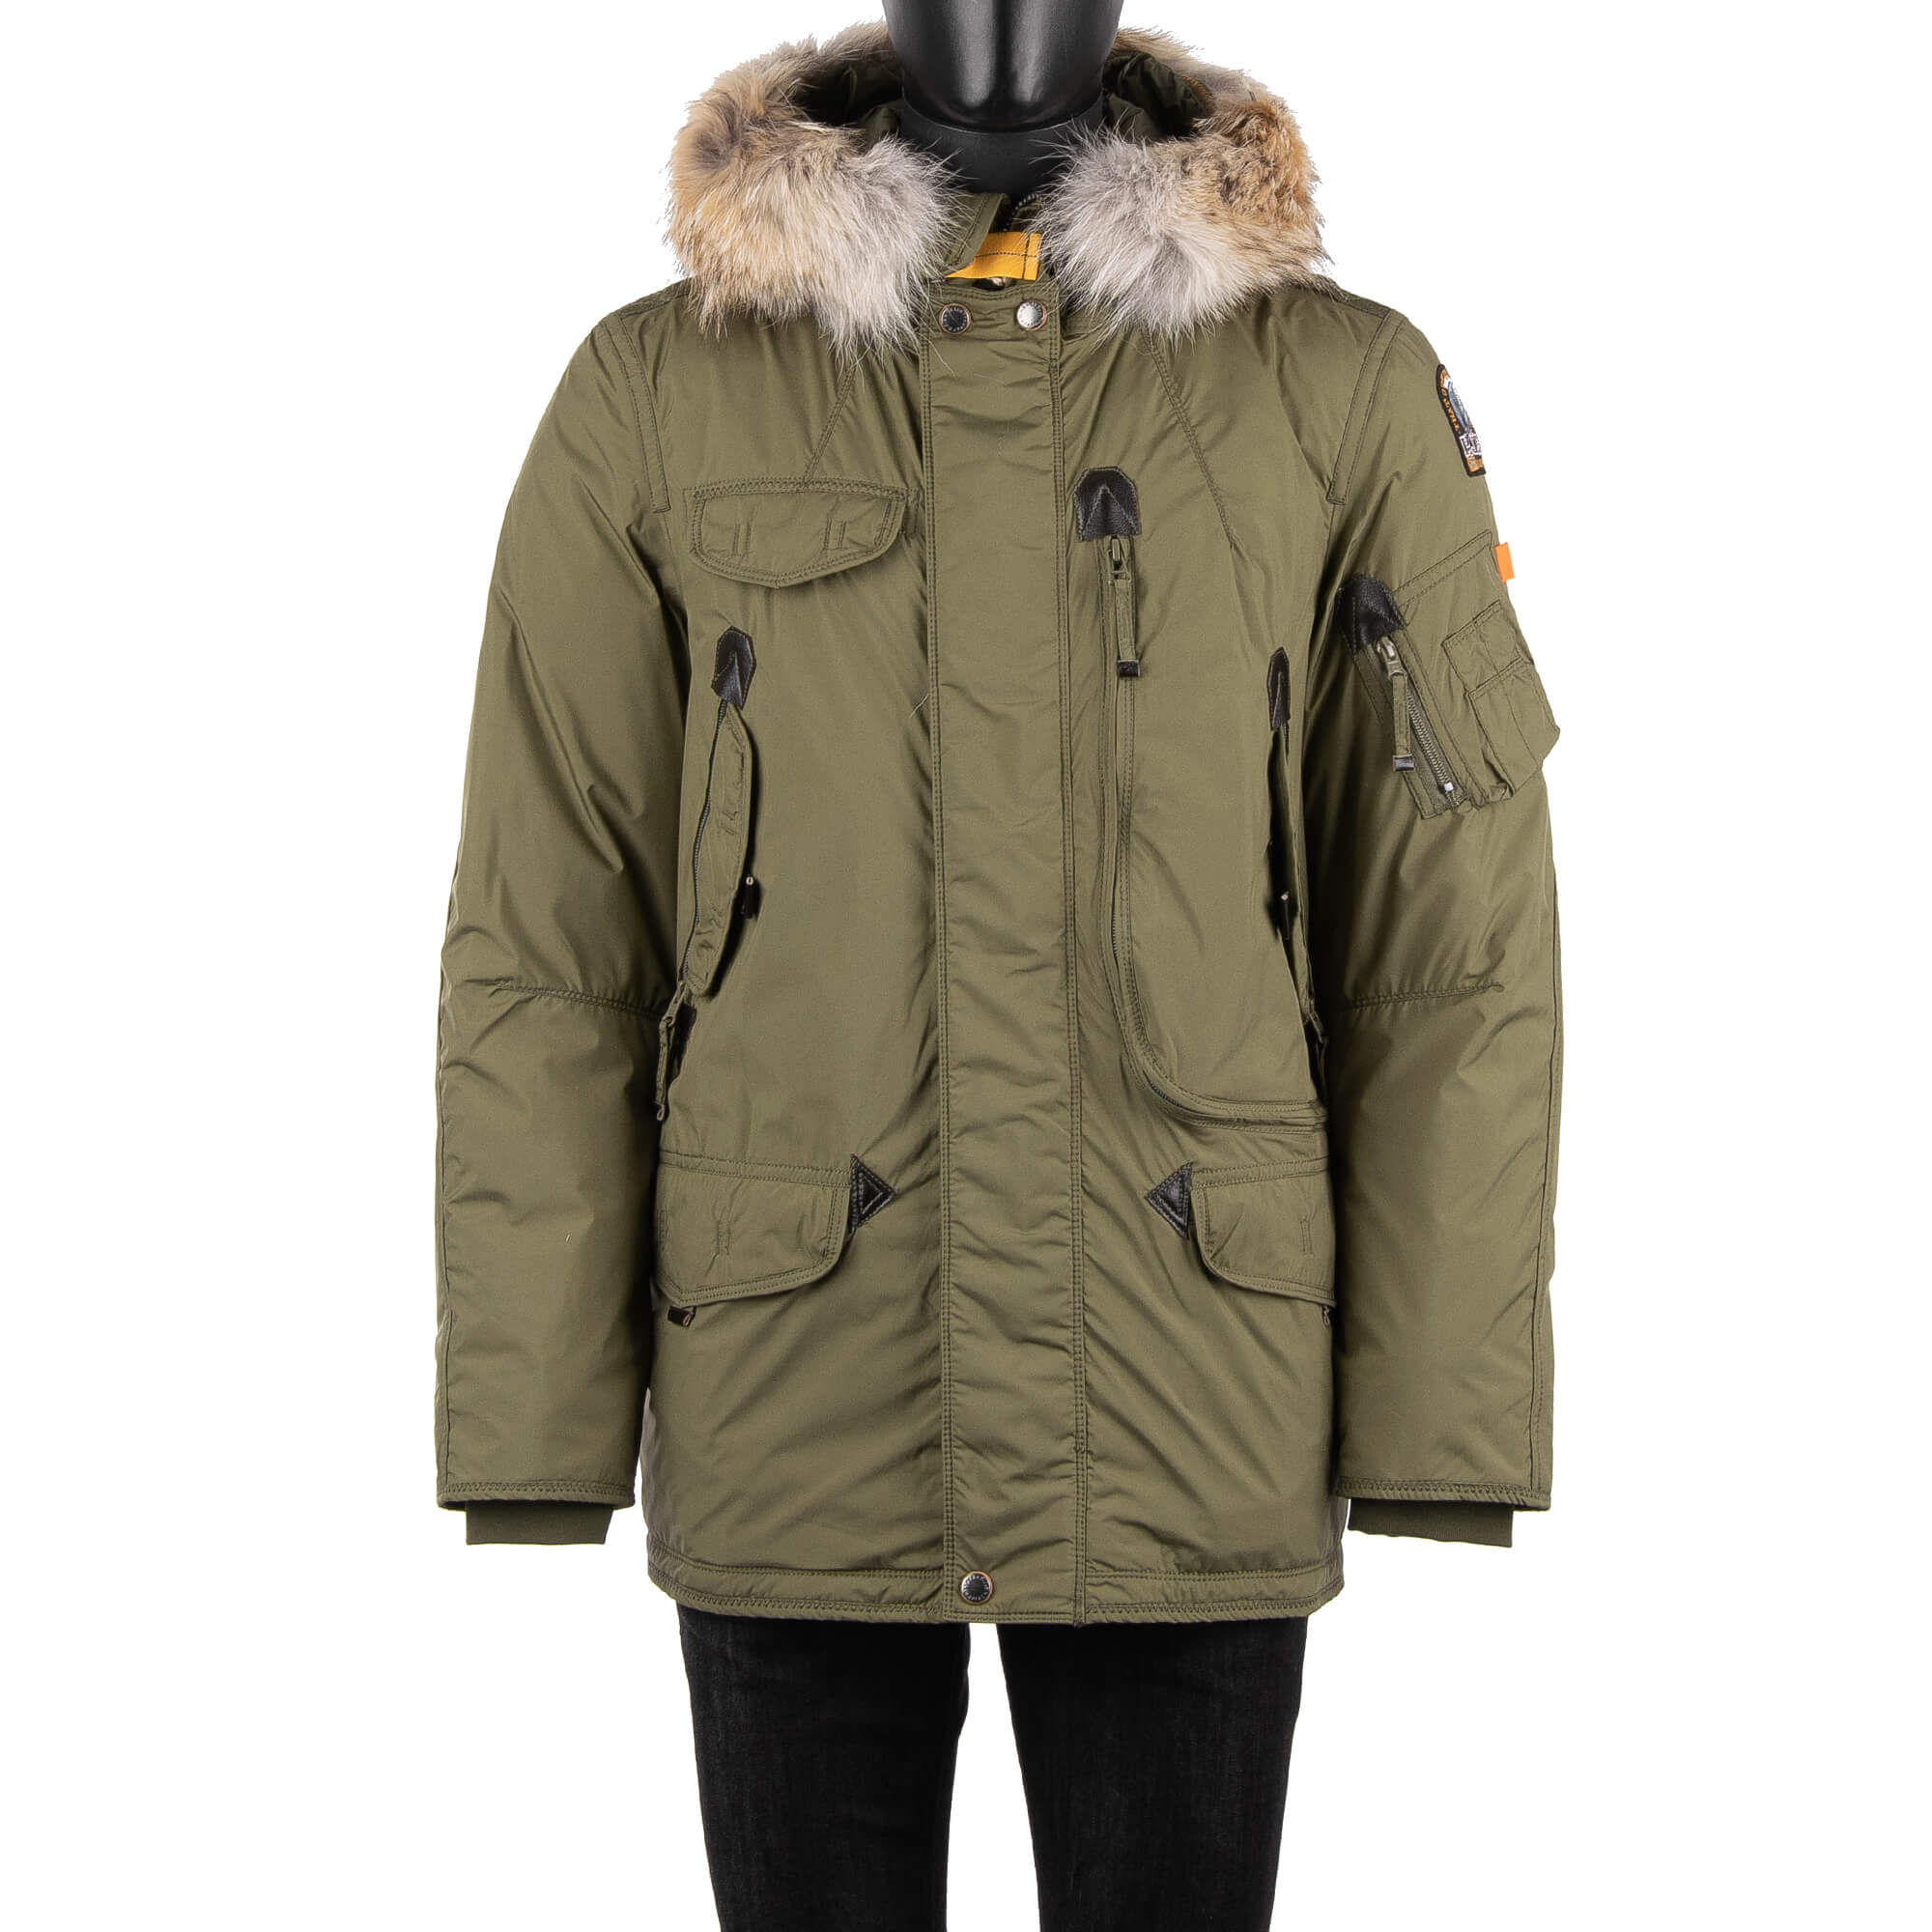 Parajumpers Parka Down Jacket RIGHT HAND LIGHT with Fur Hoody Army ...